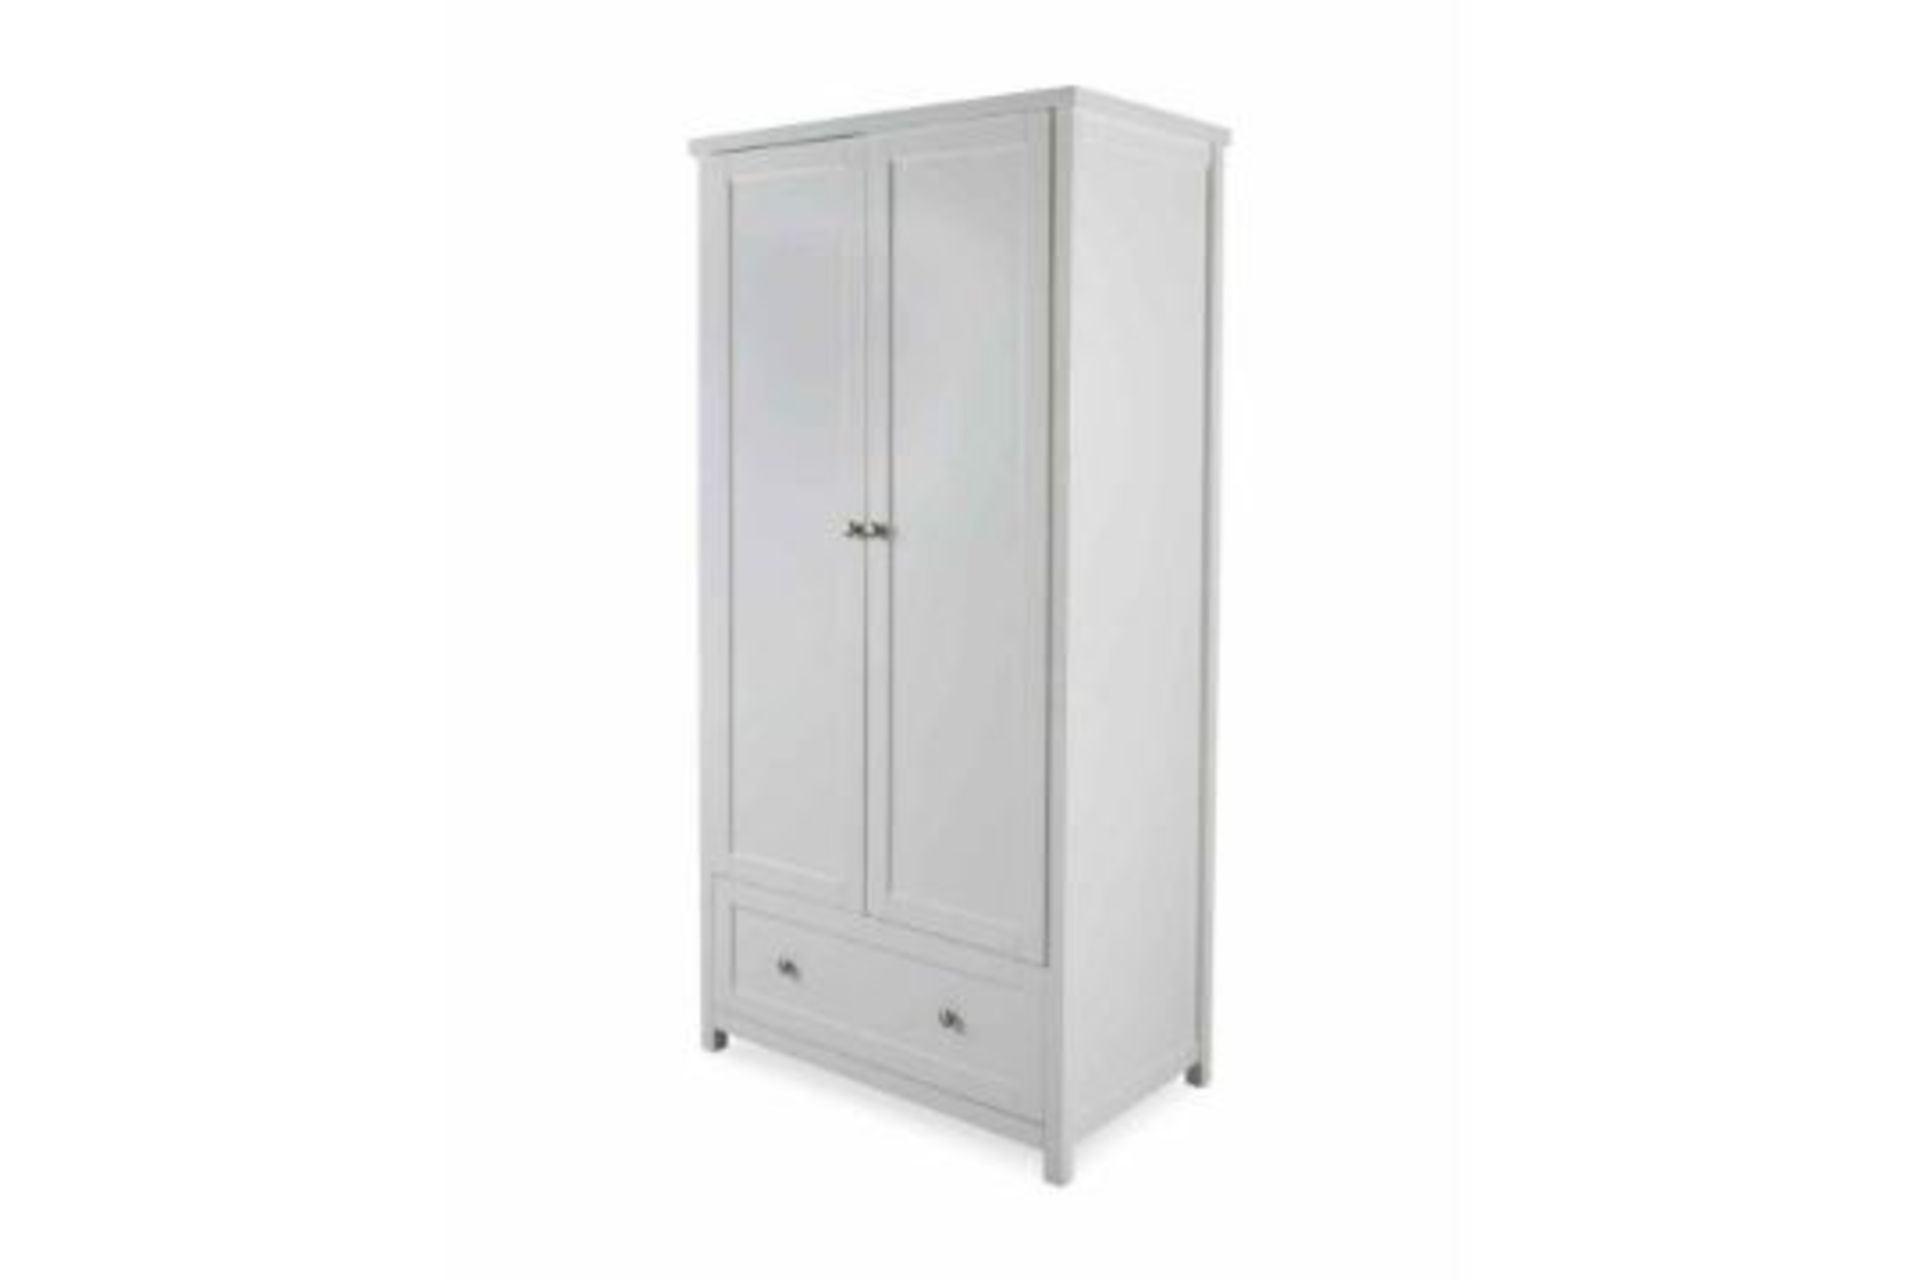 Luxury Nursery Wardrobe . This adorable, self-assembly Luxury Grey And White Wardrobe is a beautiful